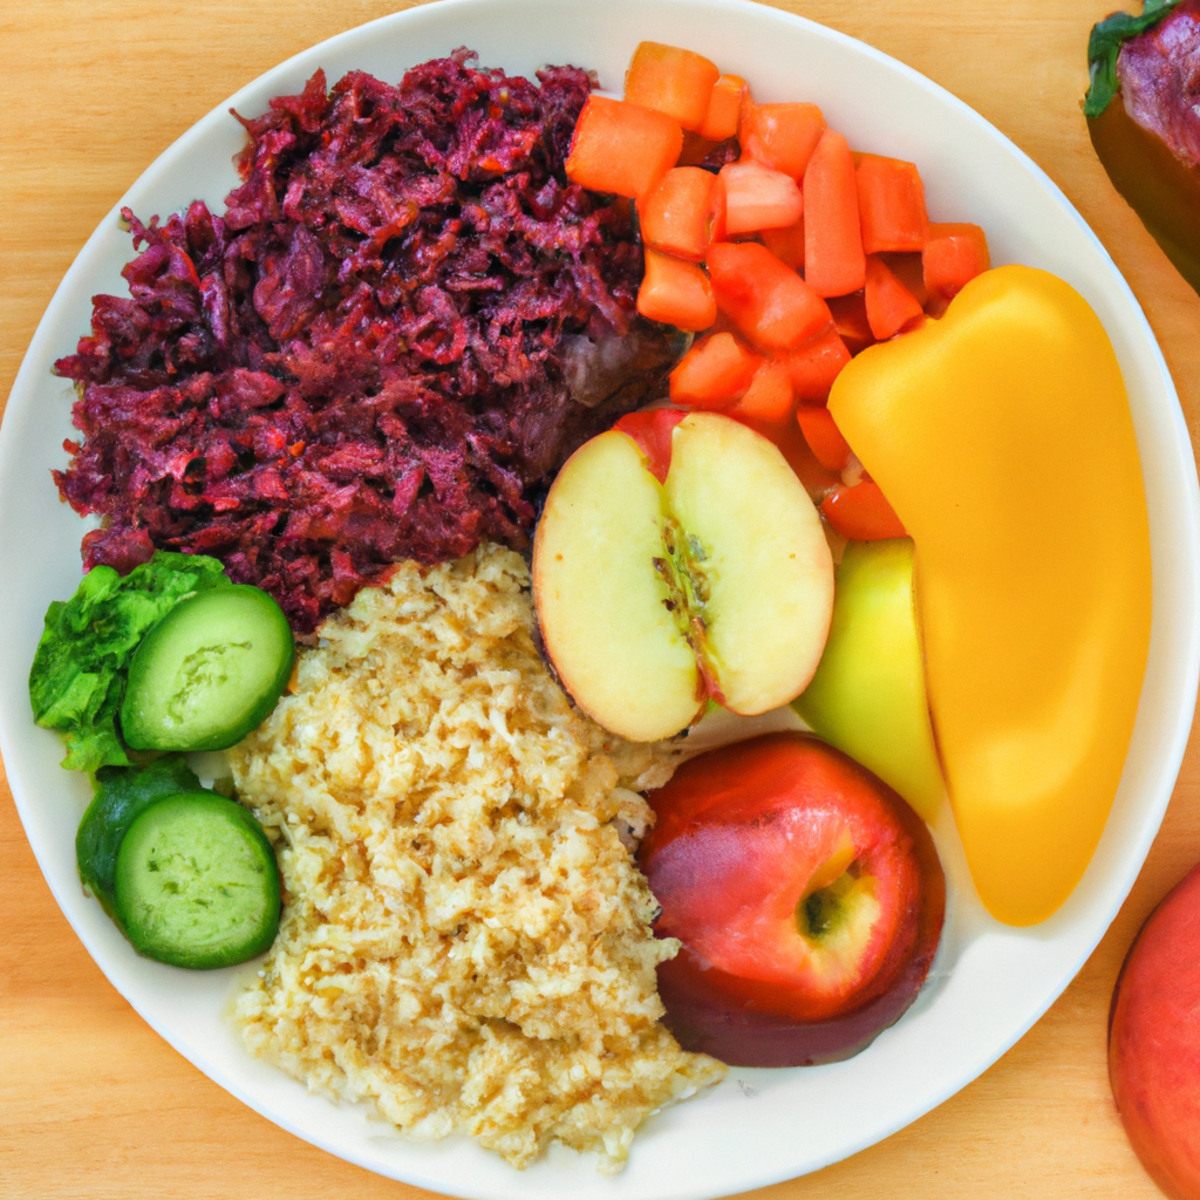 Vibrant, colorful plate of fresh fruits, vegetables, and grains, showcasing balanced diet's impact on well-being - Eosinophilic gastroenteritis